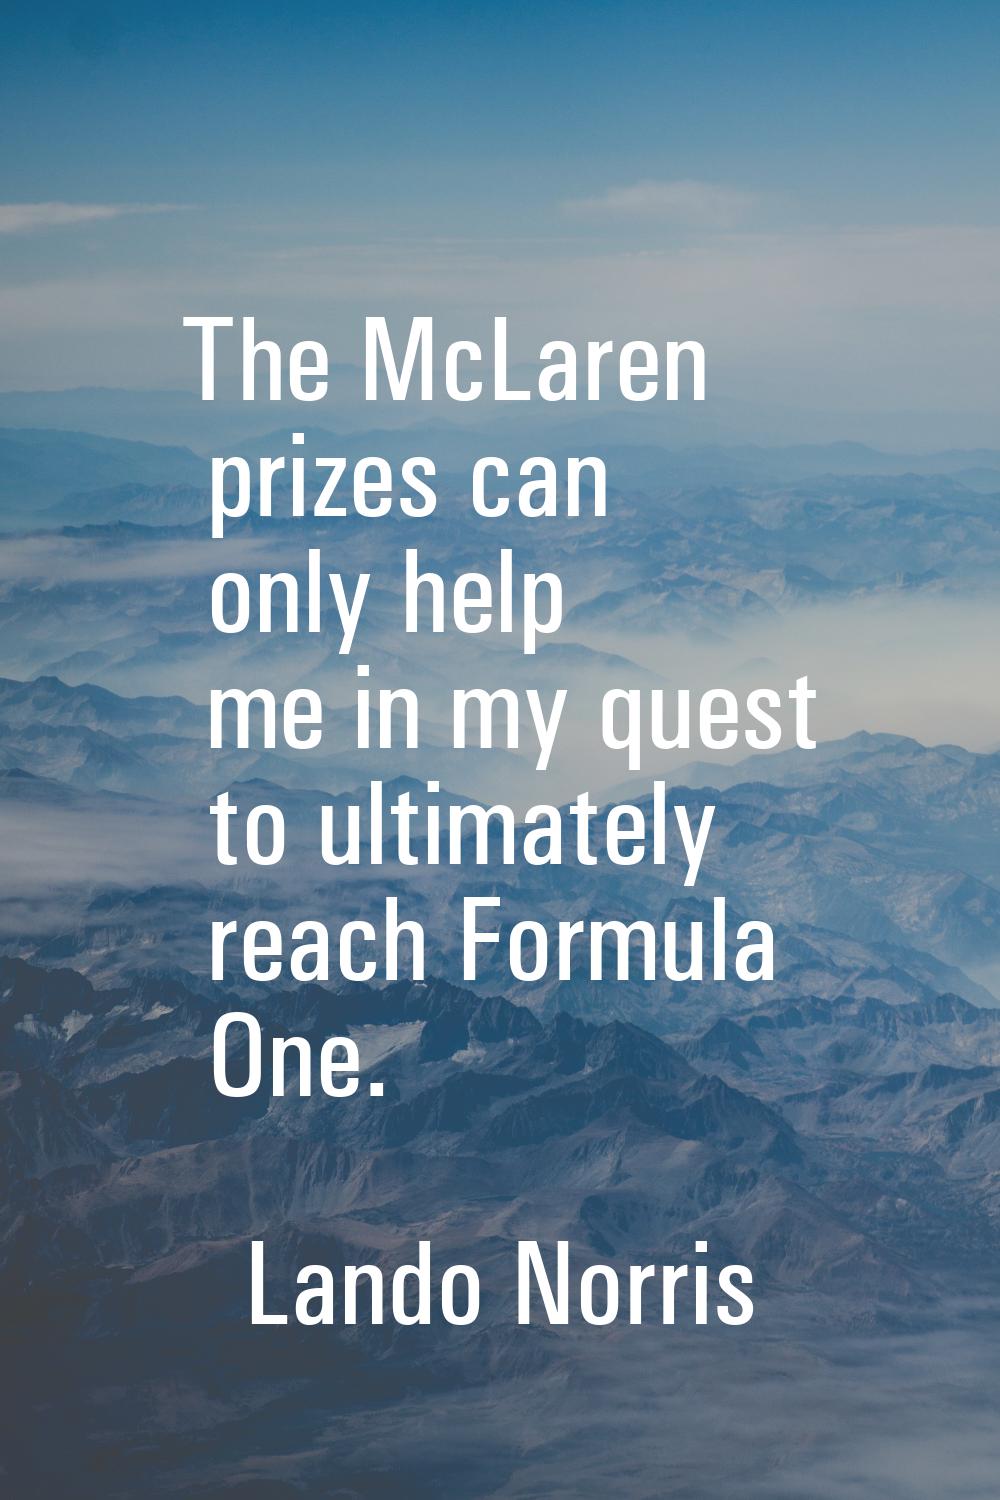 The McLaren prizes can only help me in my quest to ultimately reach Formula One.